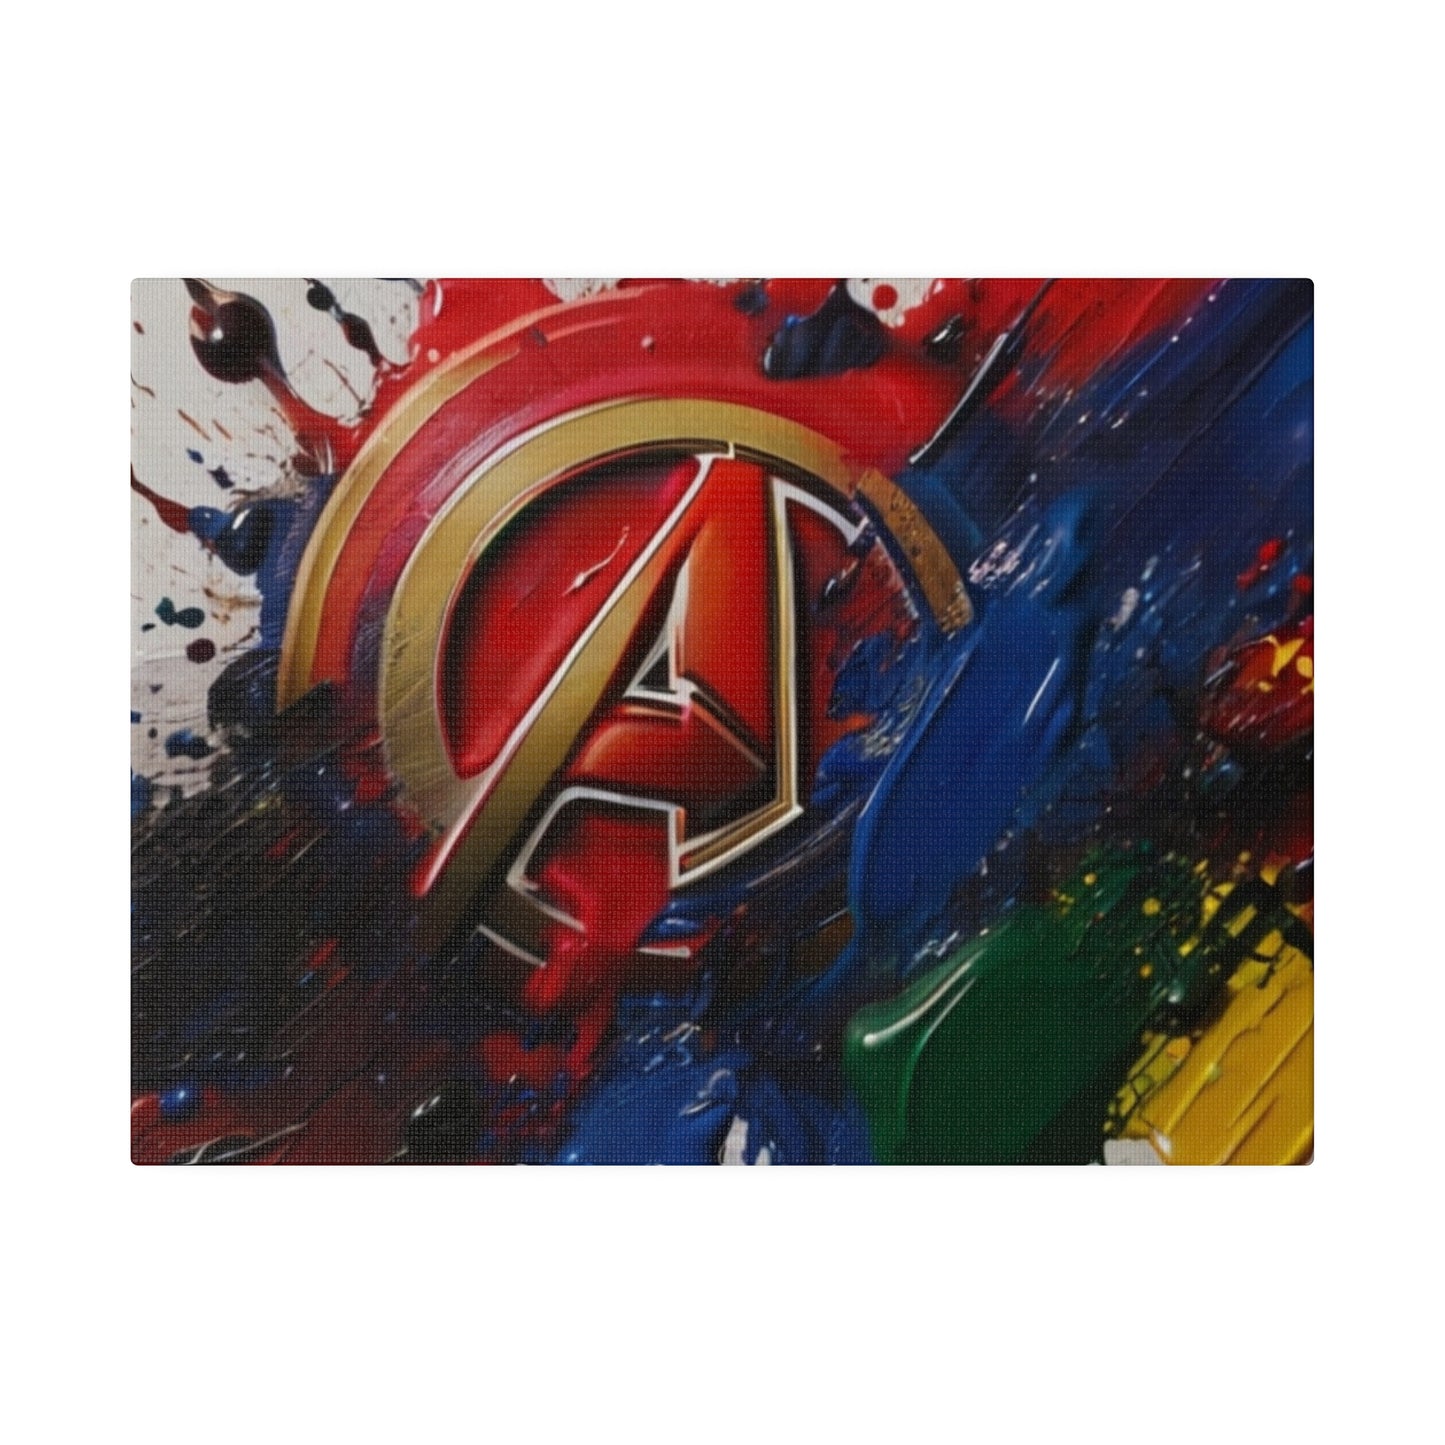 Messy Painted Avengers Logo Symbol - Matte Canvas, Stretched, 0.75"